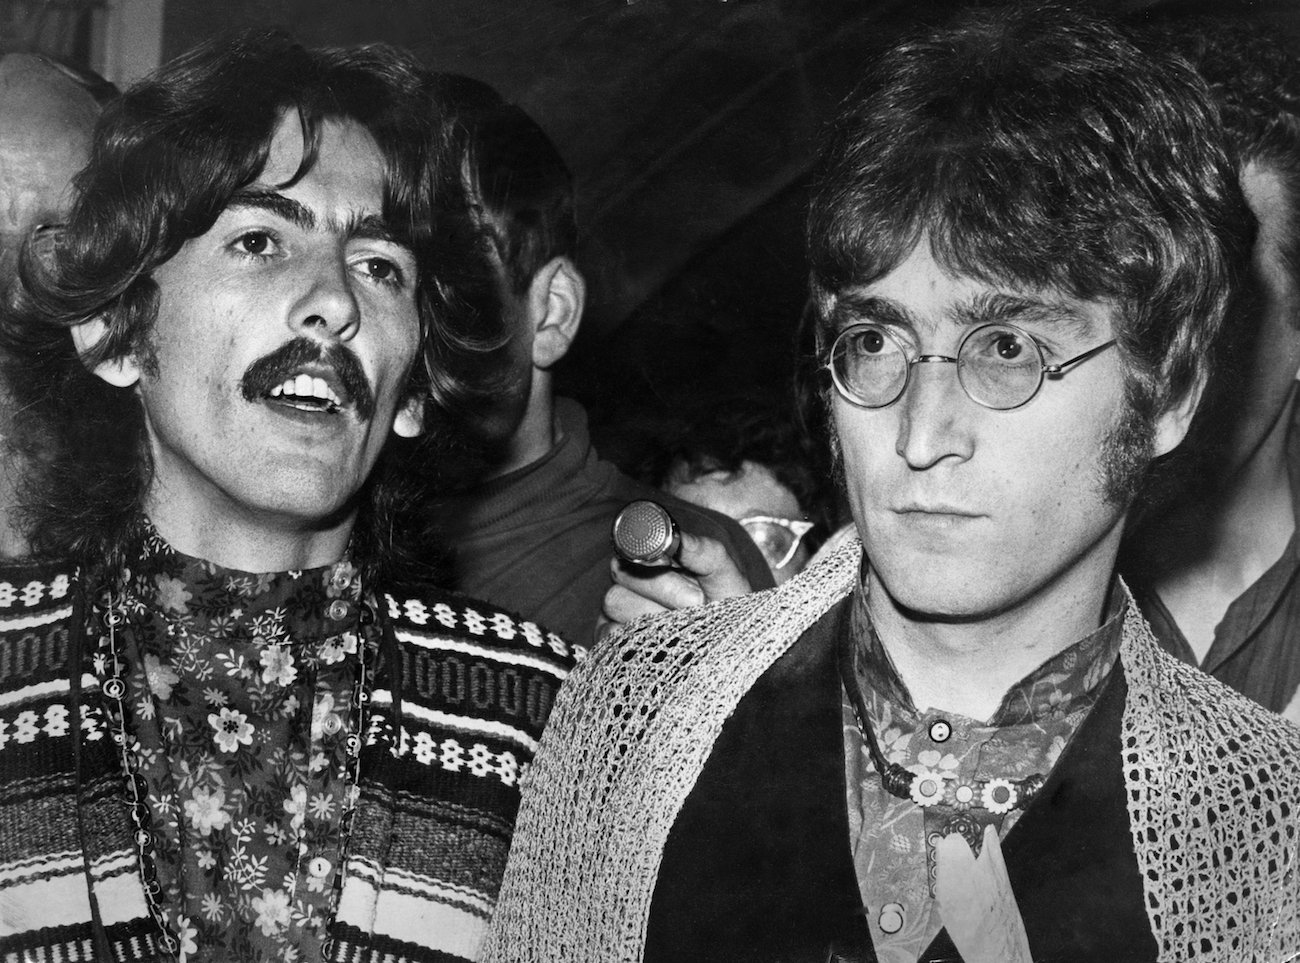 John Lennon Began to Think There Must Be a God When He Kept Hearing George Harrison's 'My Sweet Lord' on the Radio